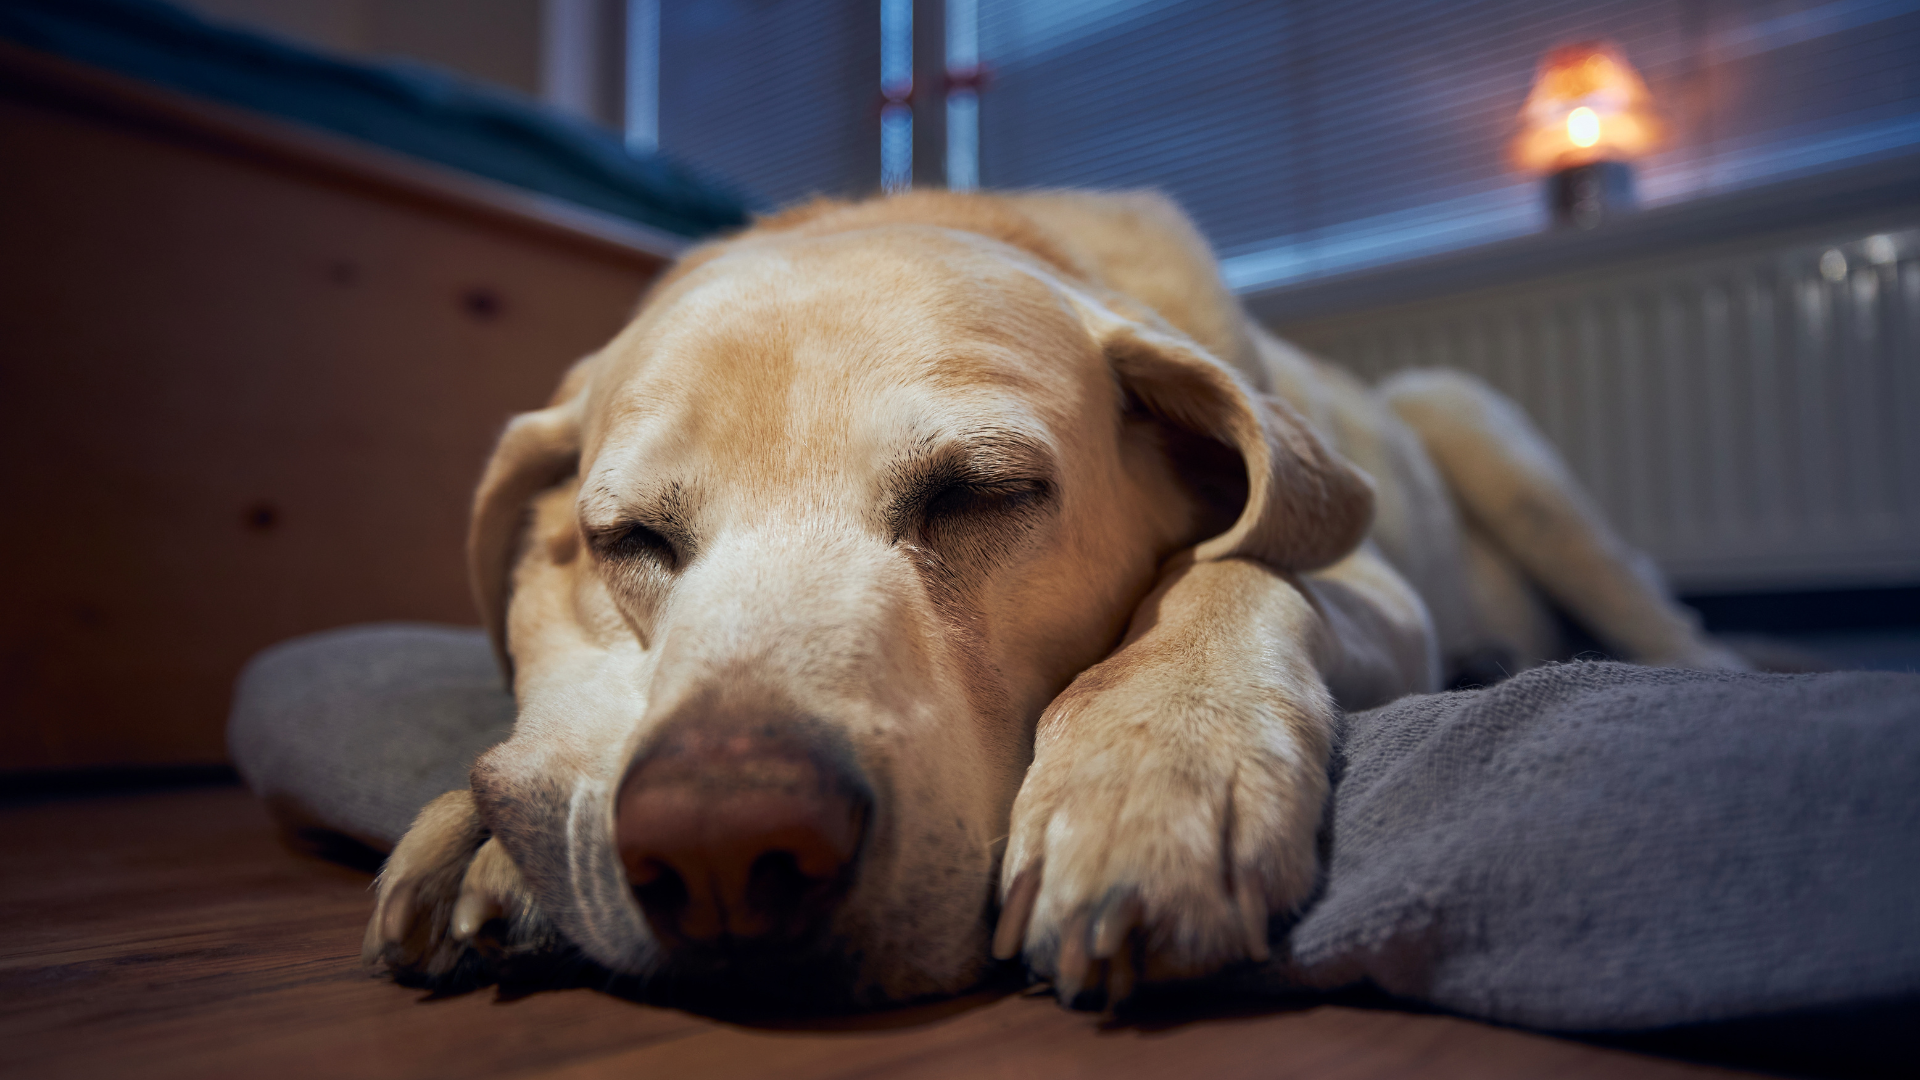 Can You Leave Your Dog Overnight?